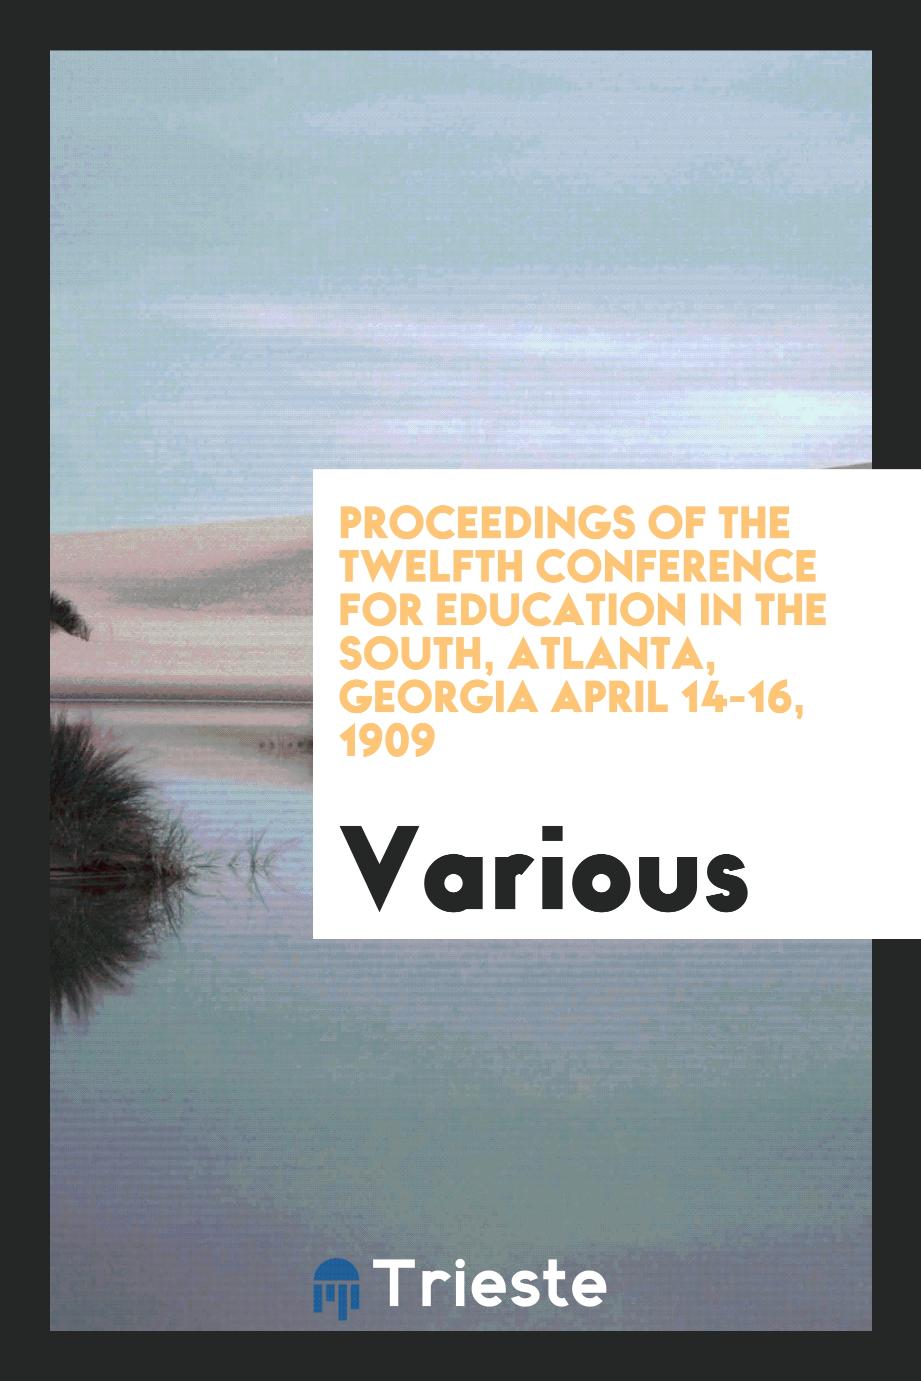 Proceedings of the twelfth conference for education in the South, Atlanta, Georgia April 14-16, 1909